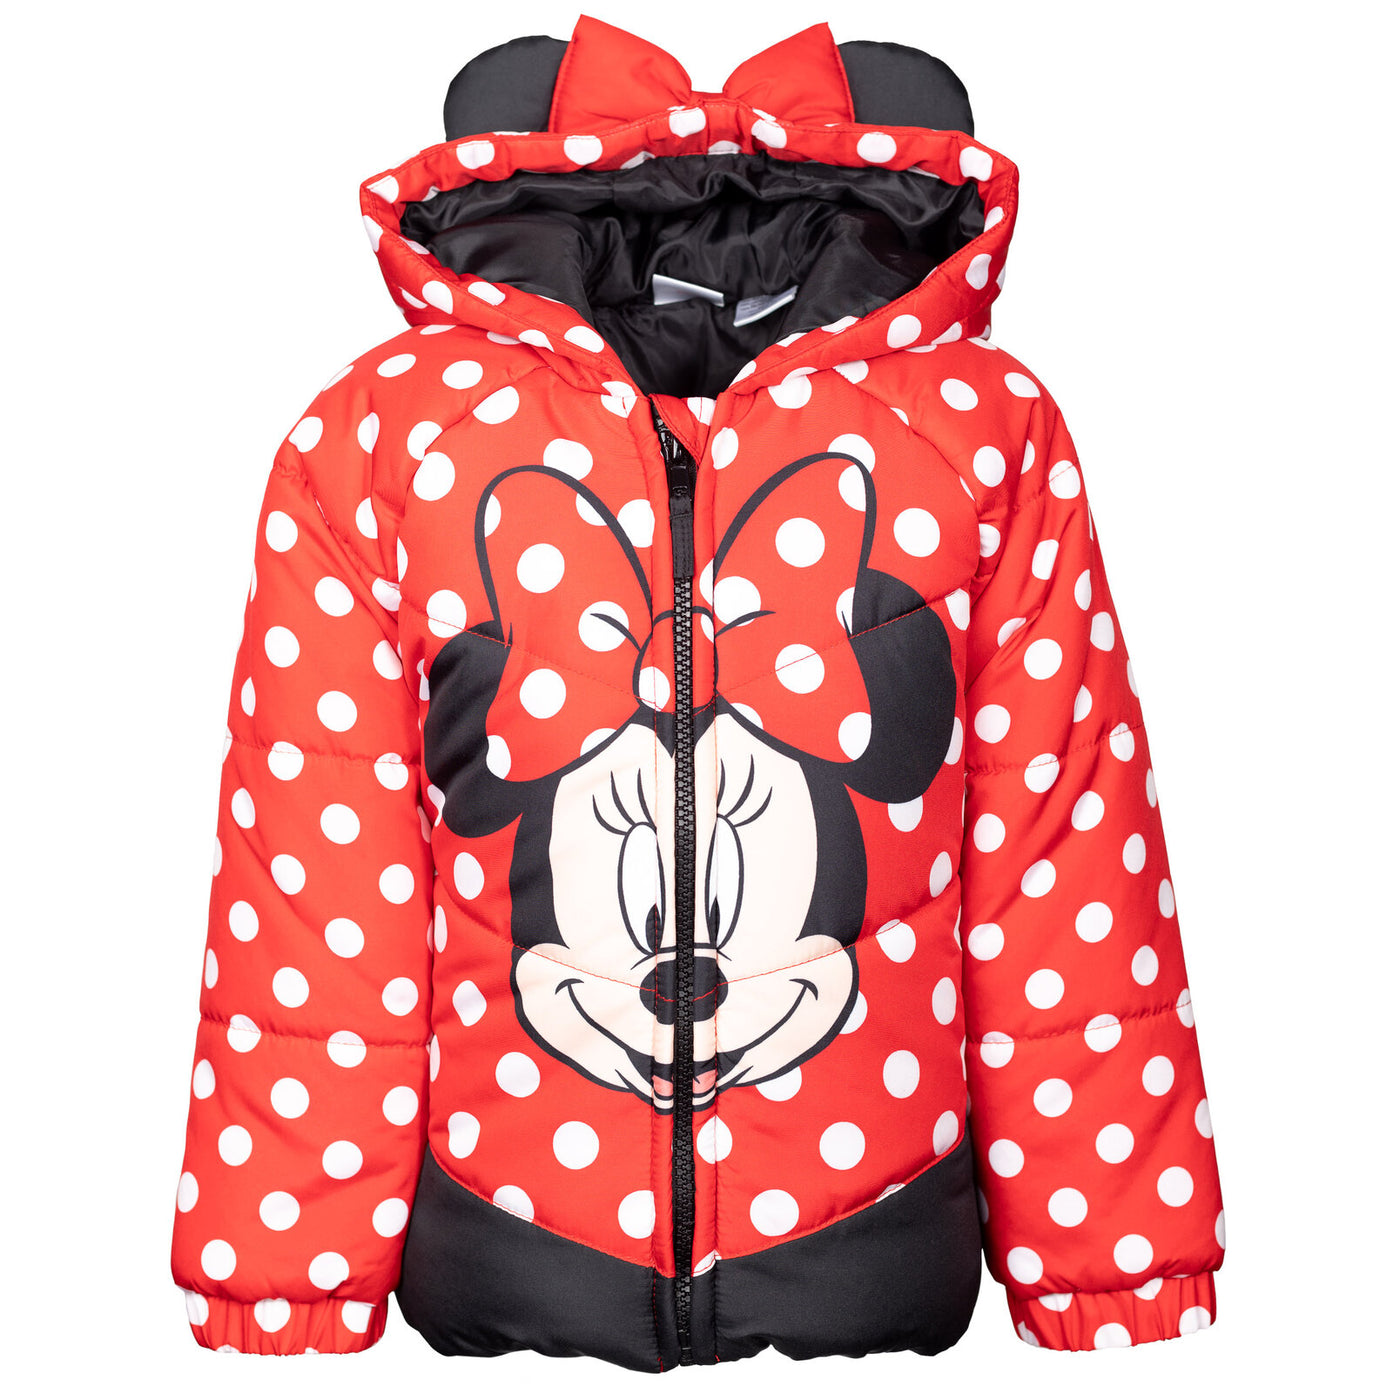 Minnie Mouse Zip Up Winter Coat Puffer Jacket